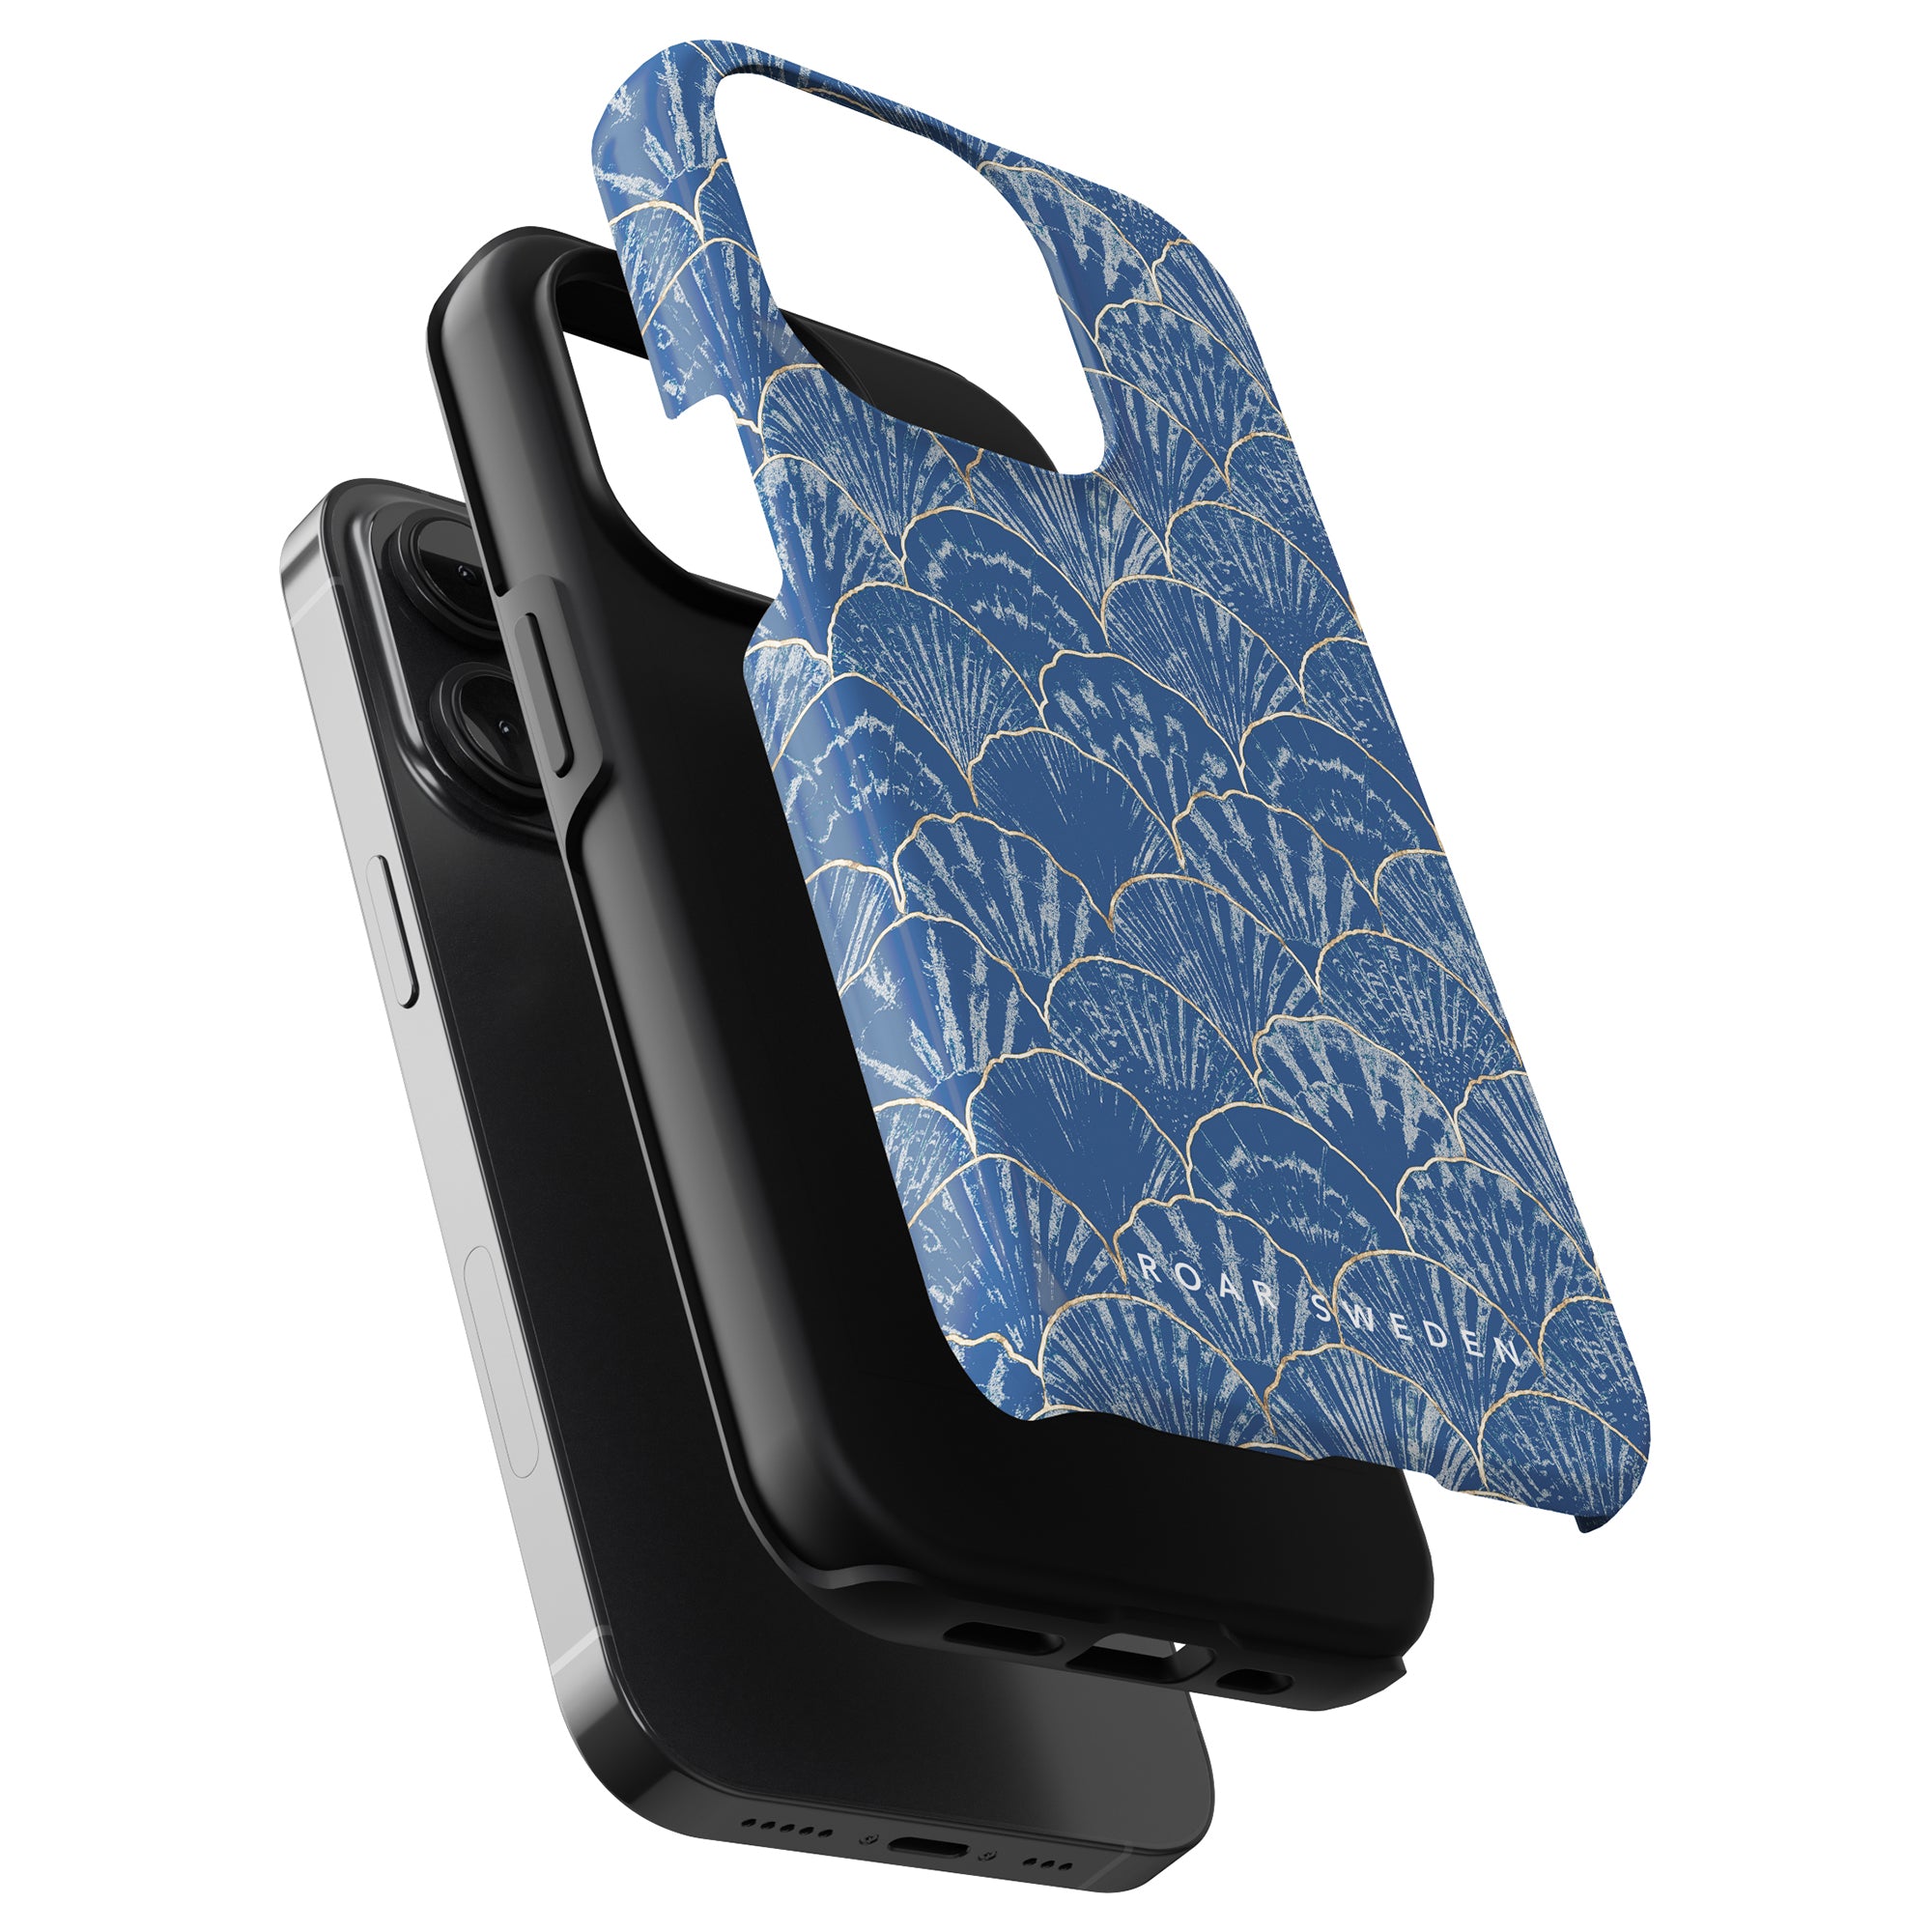 A Seashell - Tough Case for the iPhone 11 Pro.